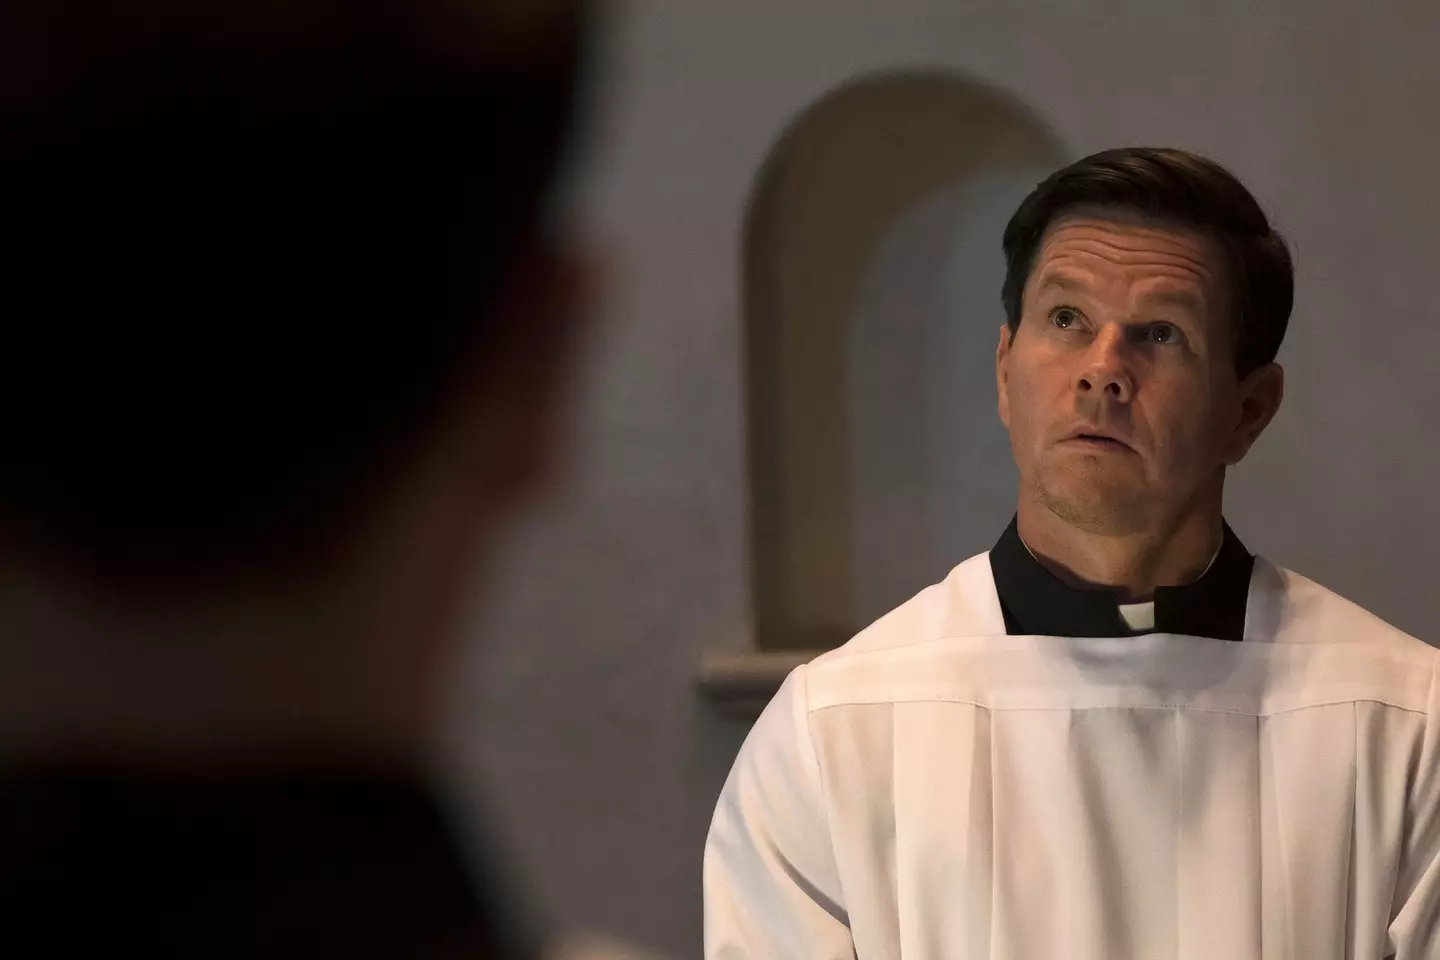 Mark Wahlberg explains how he got a 'little bit obsessive' with his target of putting on weight for his role in Father Stu.